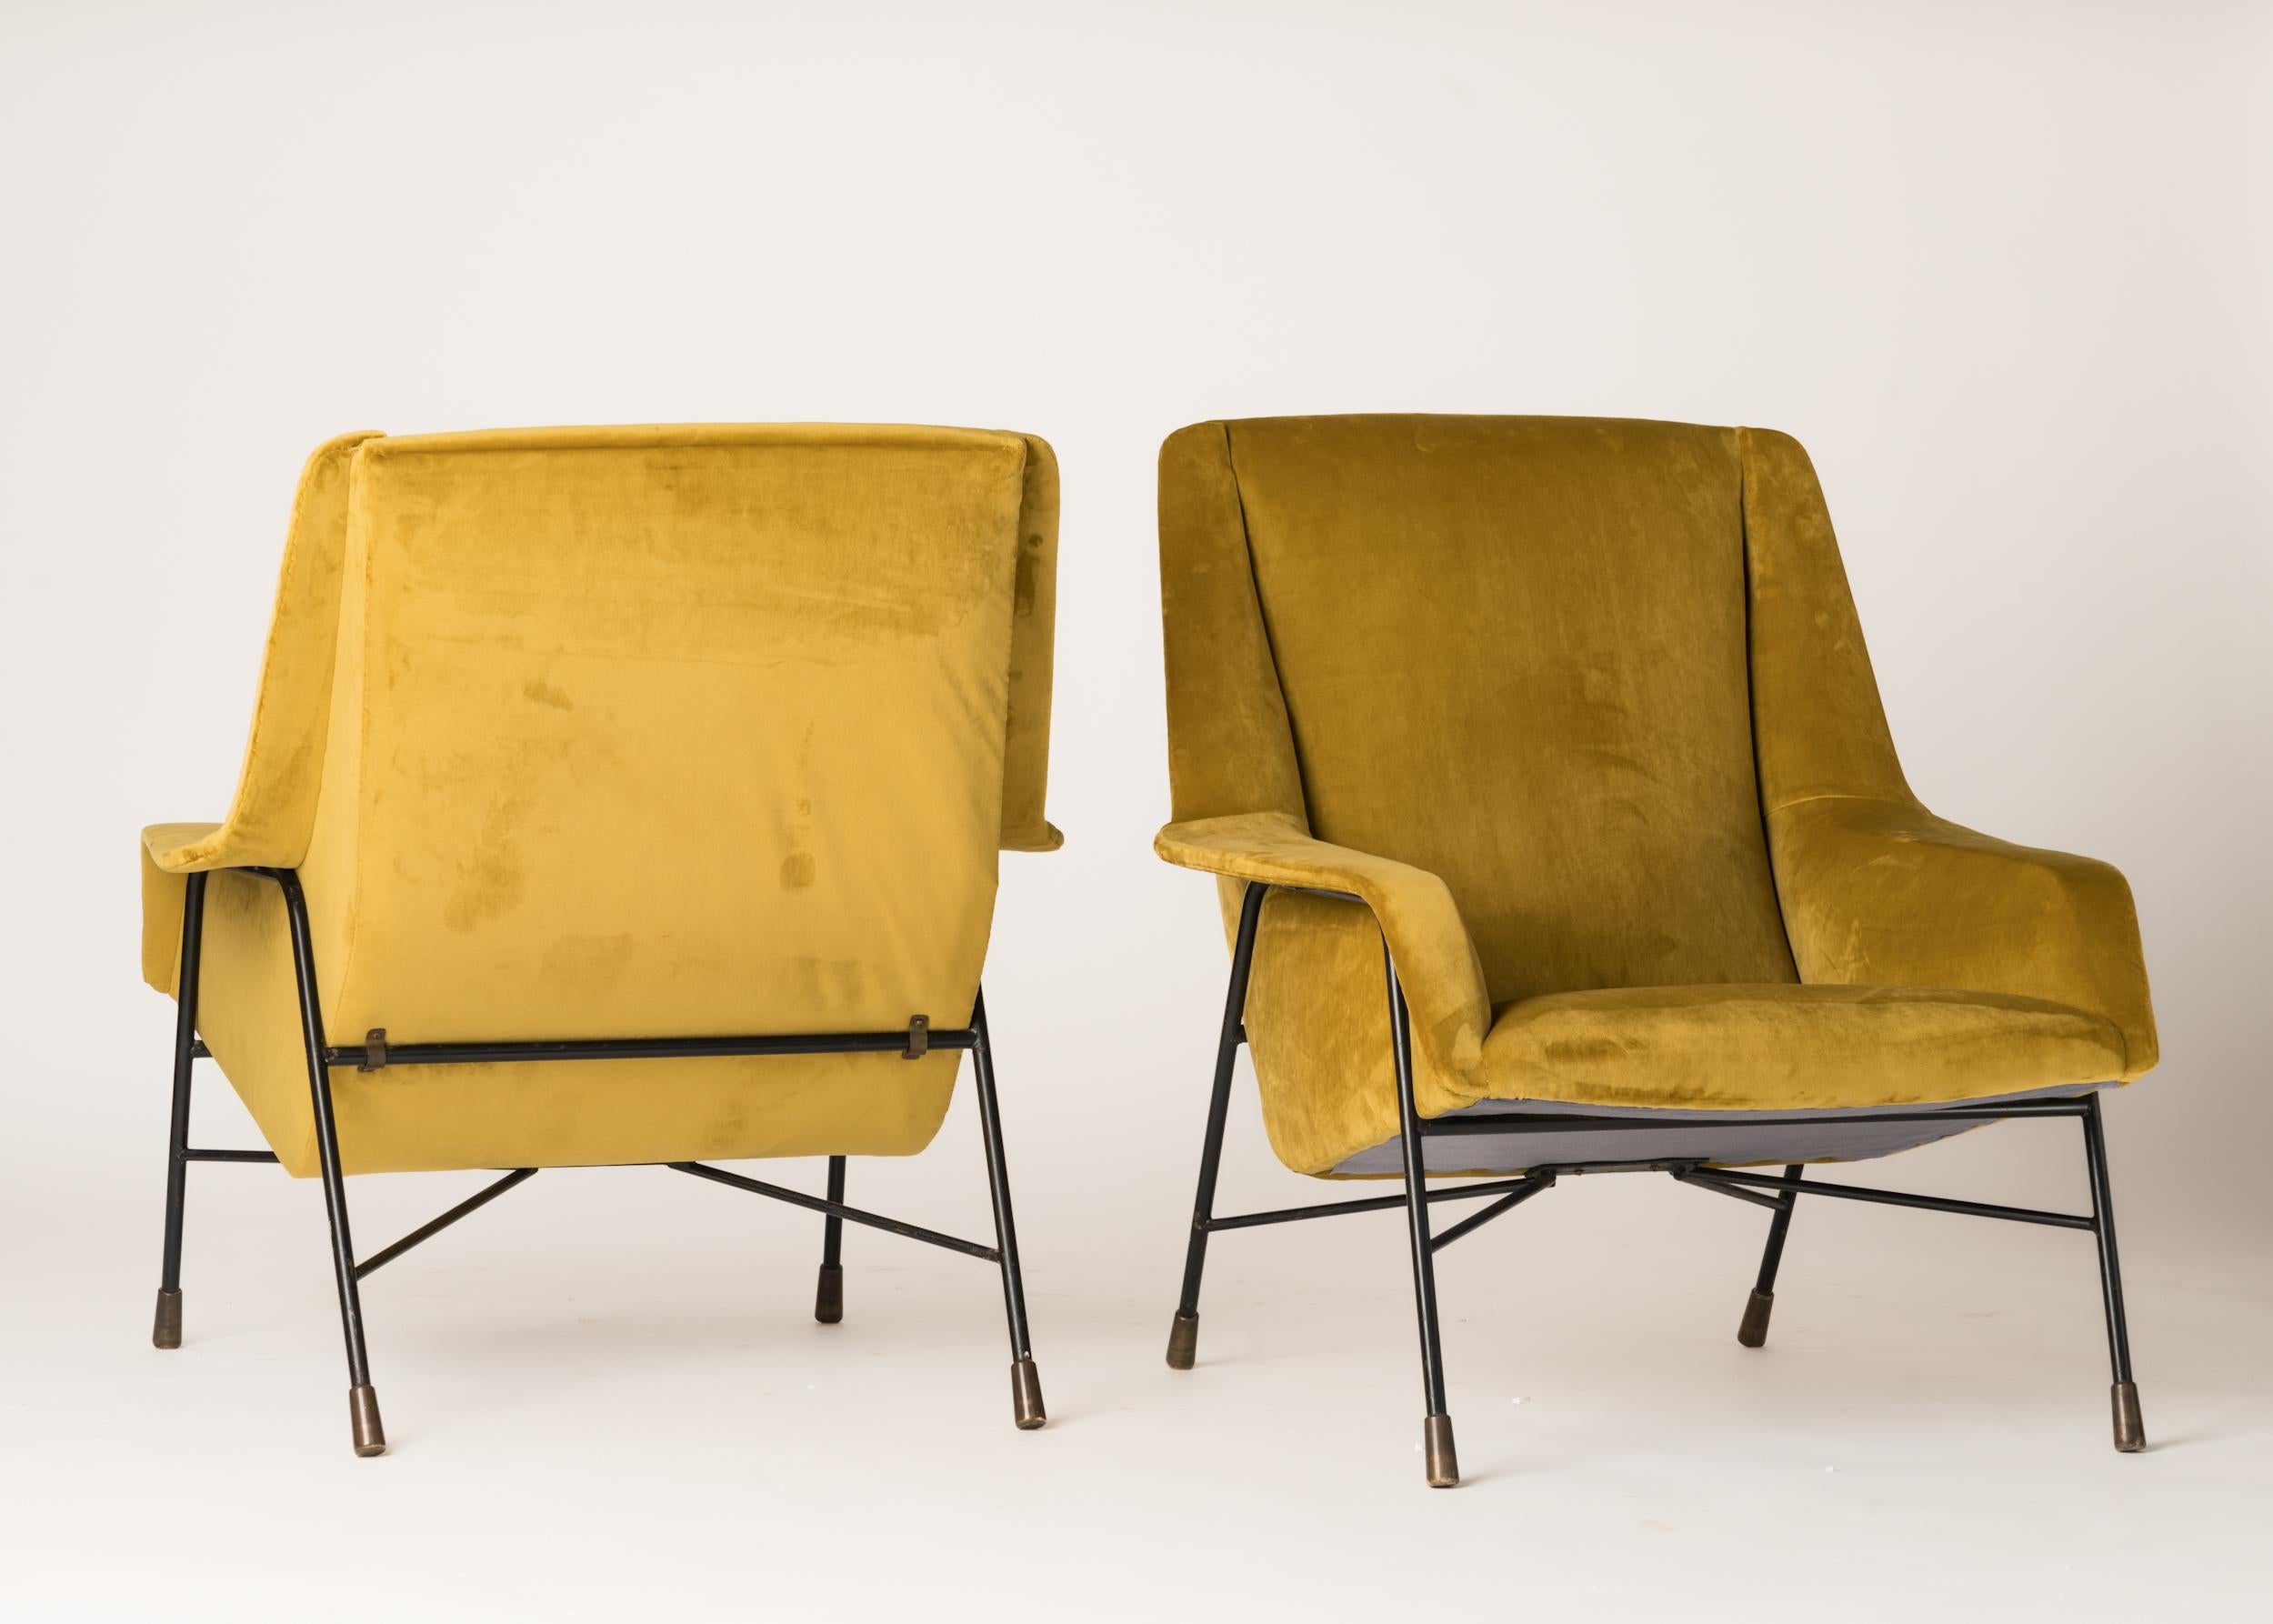 Pair of S12 Armchairs by Alfred Hendrickx for Belform, Belgium, 1958 For Sale 4